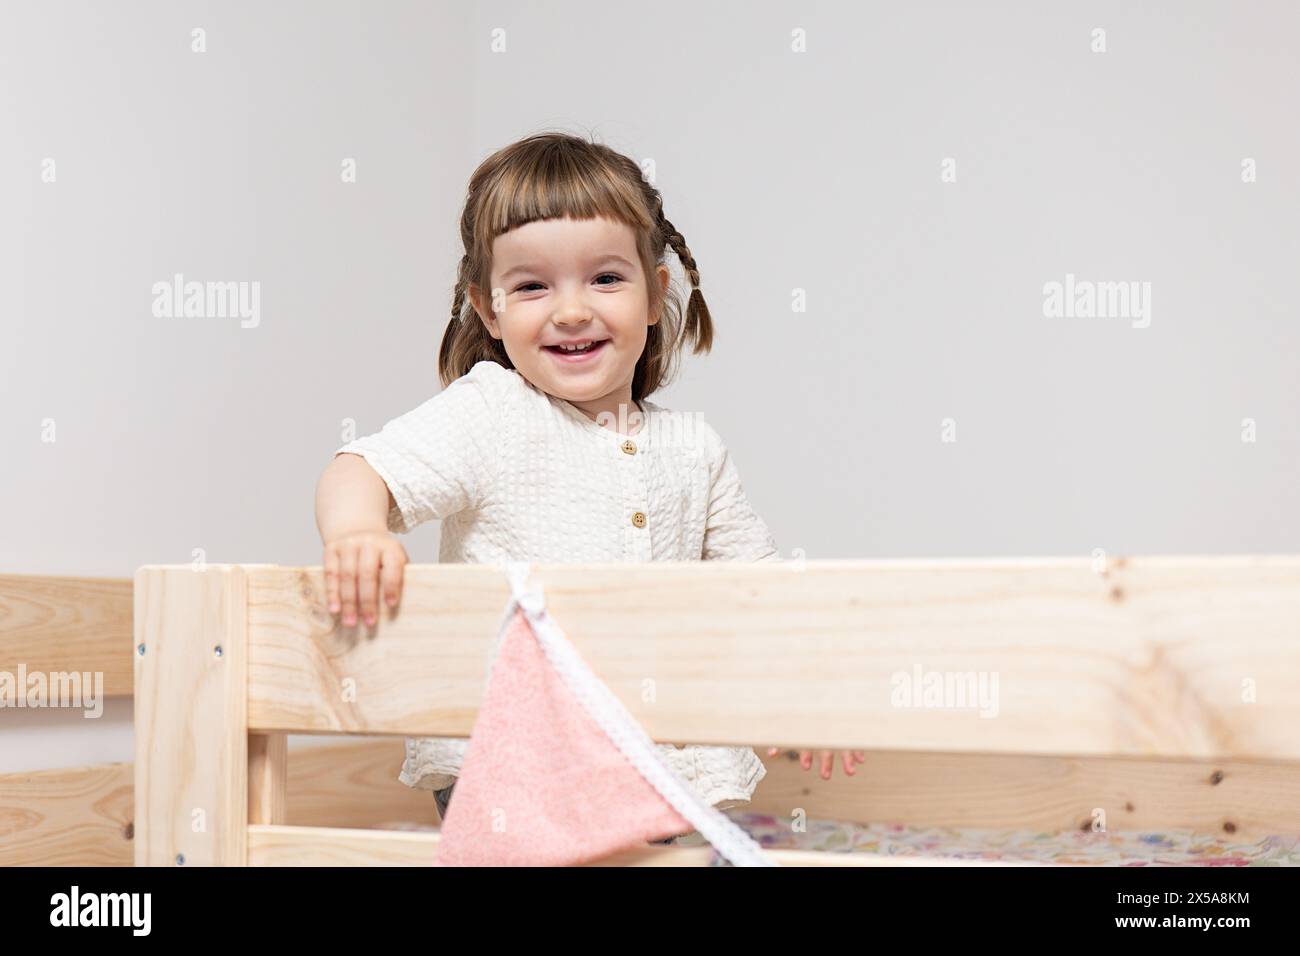 A cheerful toddler girl with pigtails smiles brightly while standing in a wooden bed with soft blankets Stock Photo